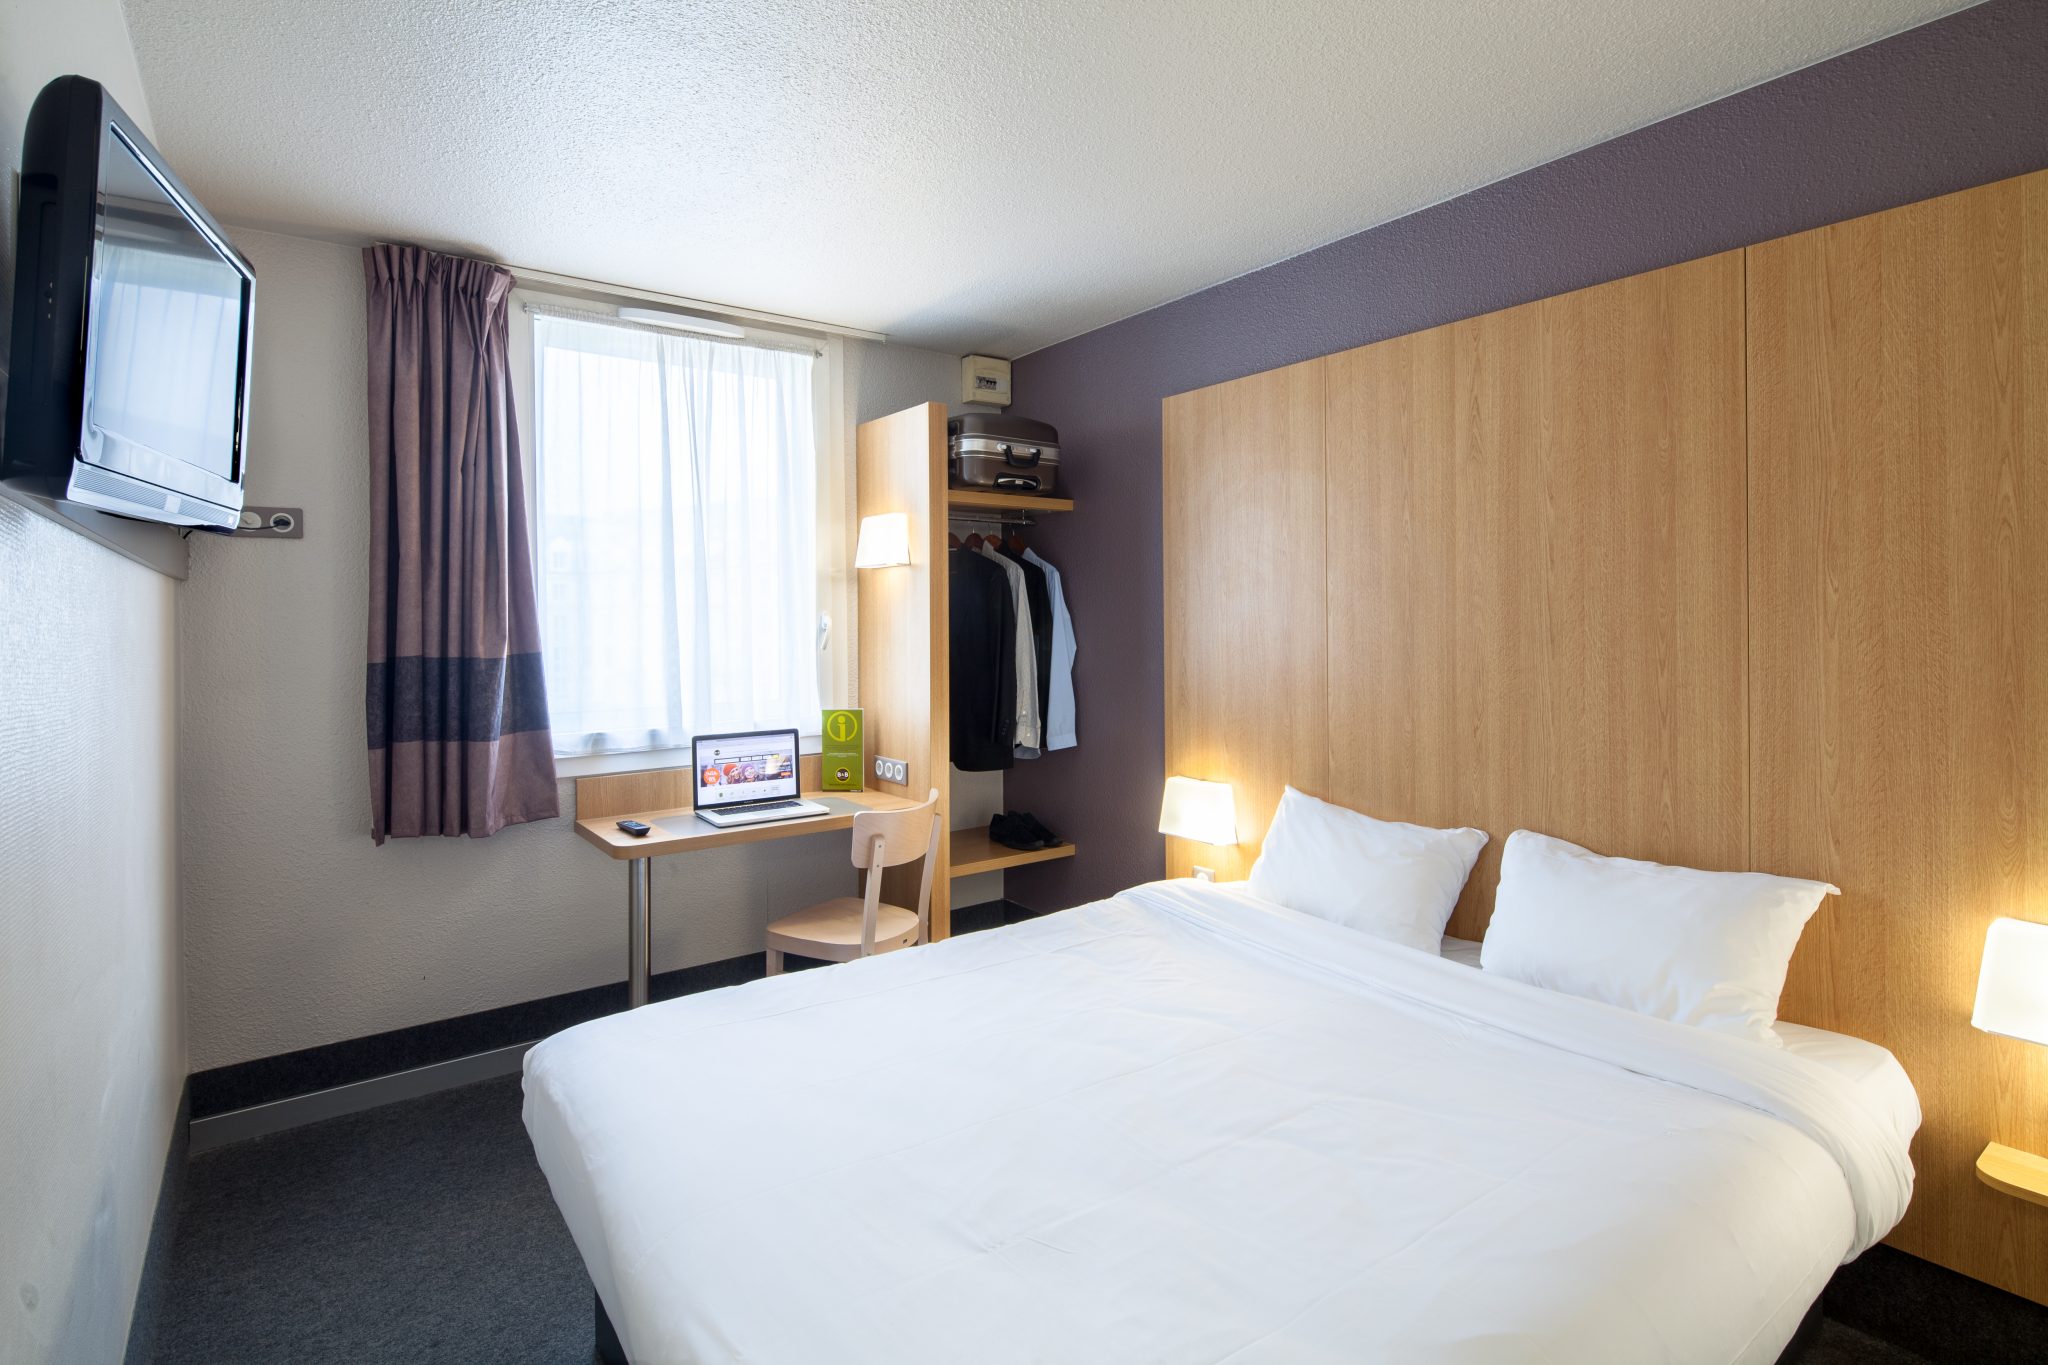 Where to sleep at a reasonable budget in Roissy?